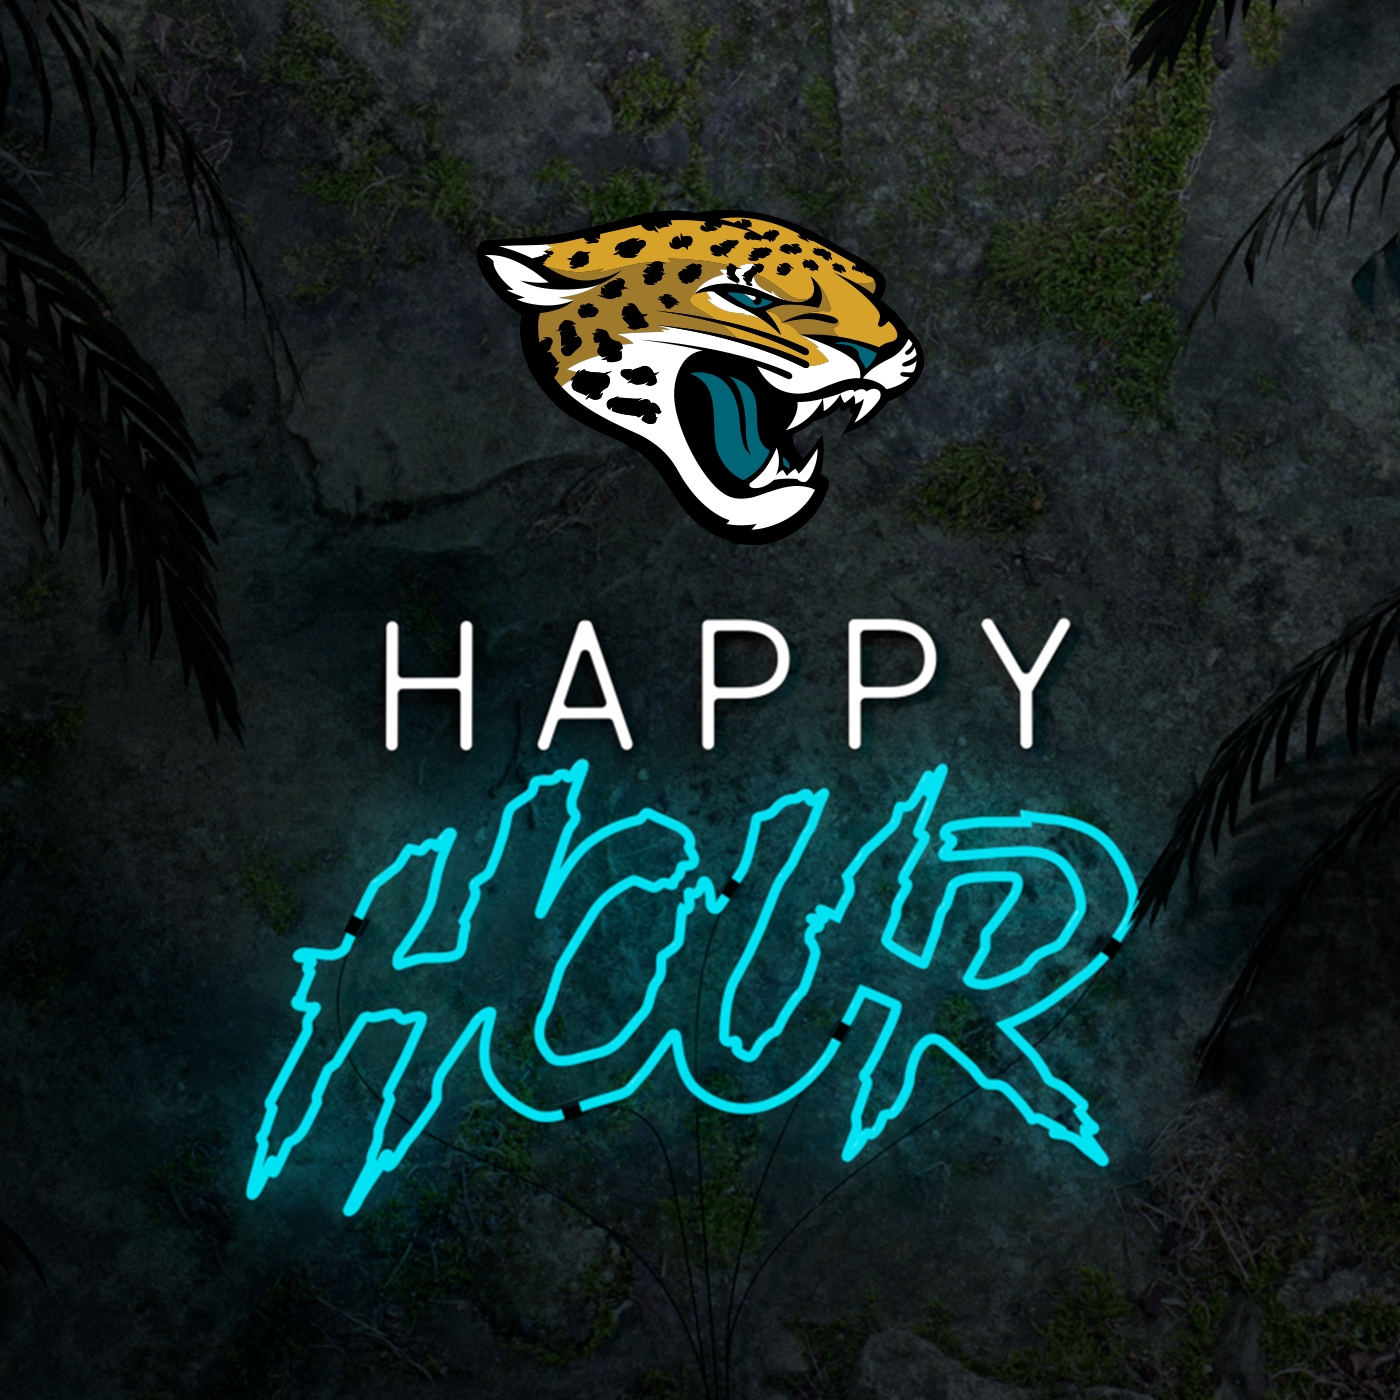 "The golden age of Jaguars football is opening right now." | Jaguars Happy Hour: Thursday, March 16